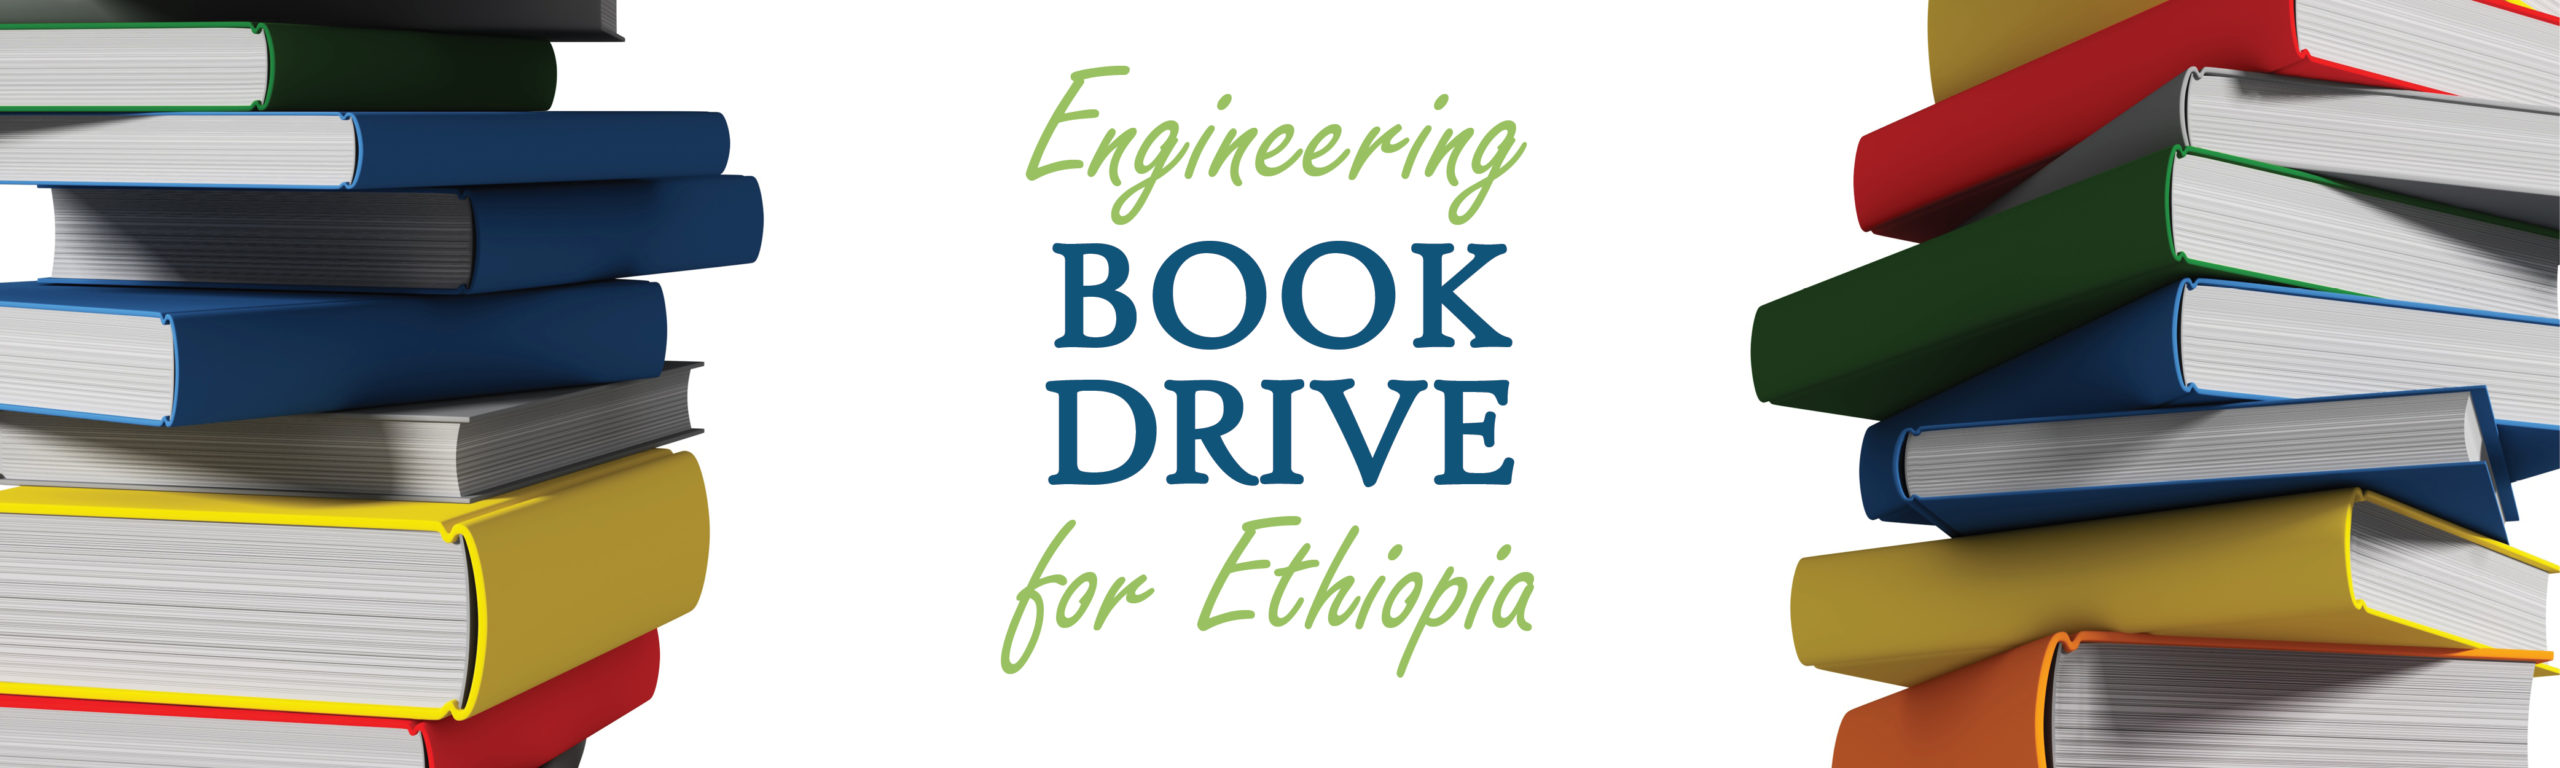 Engineering Book Drive for Ethiopia